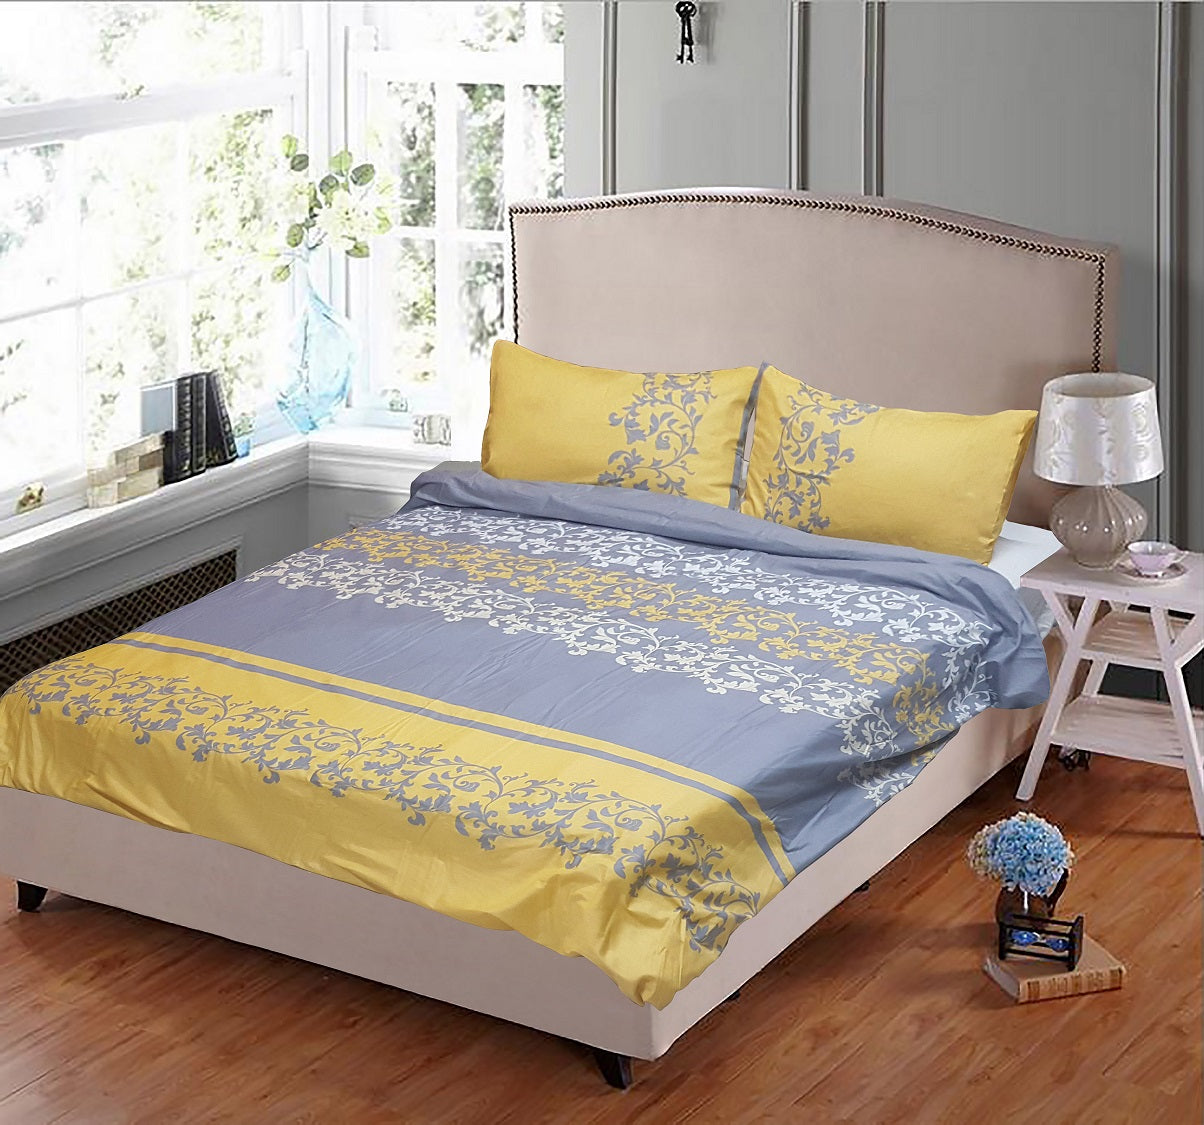 Duvet/Quilt Covers Soft Plush Pure Cotton Printed Floral on Royal Yellow and Grey